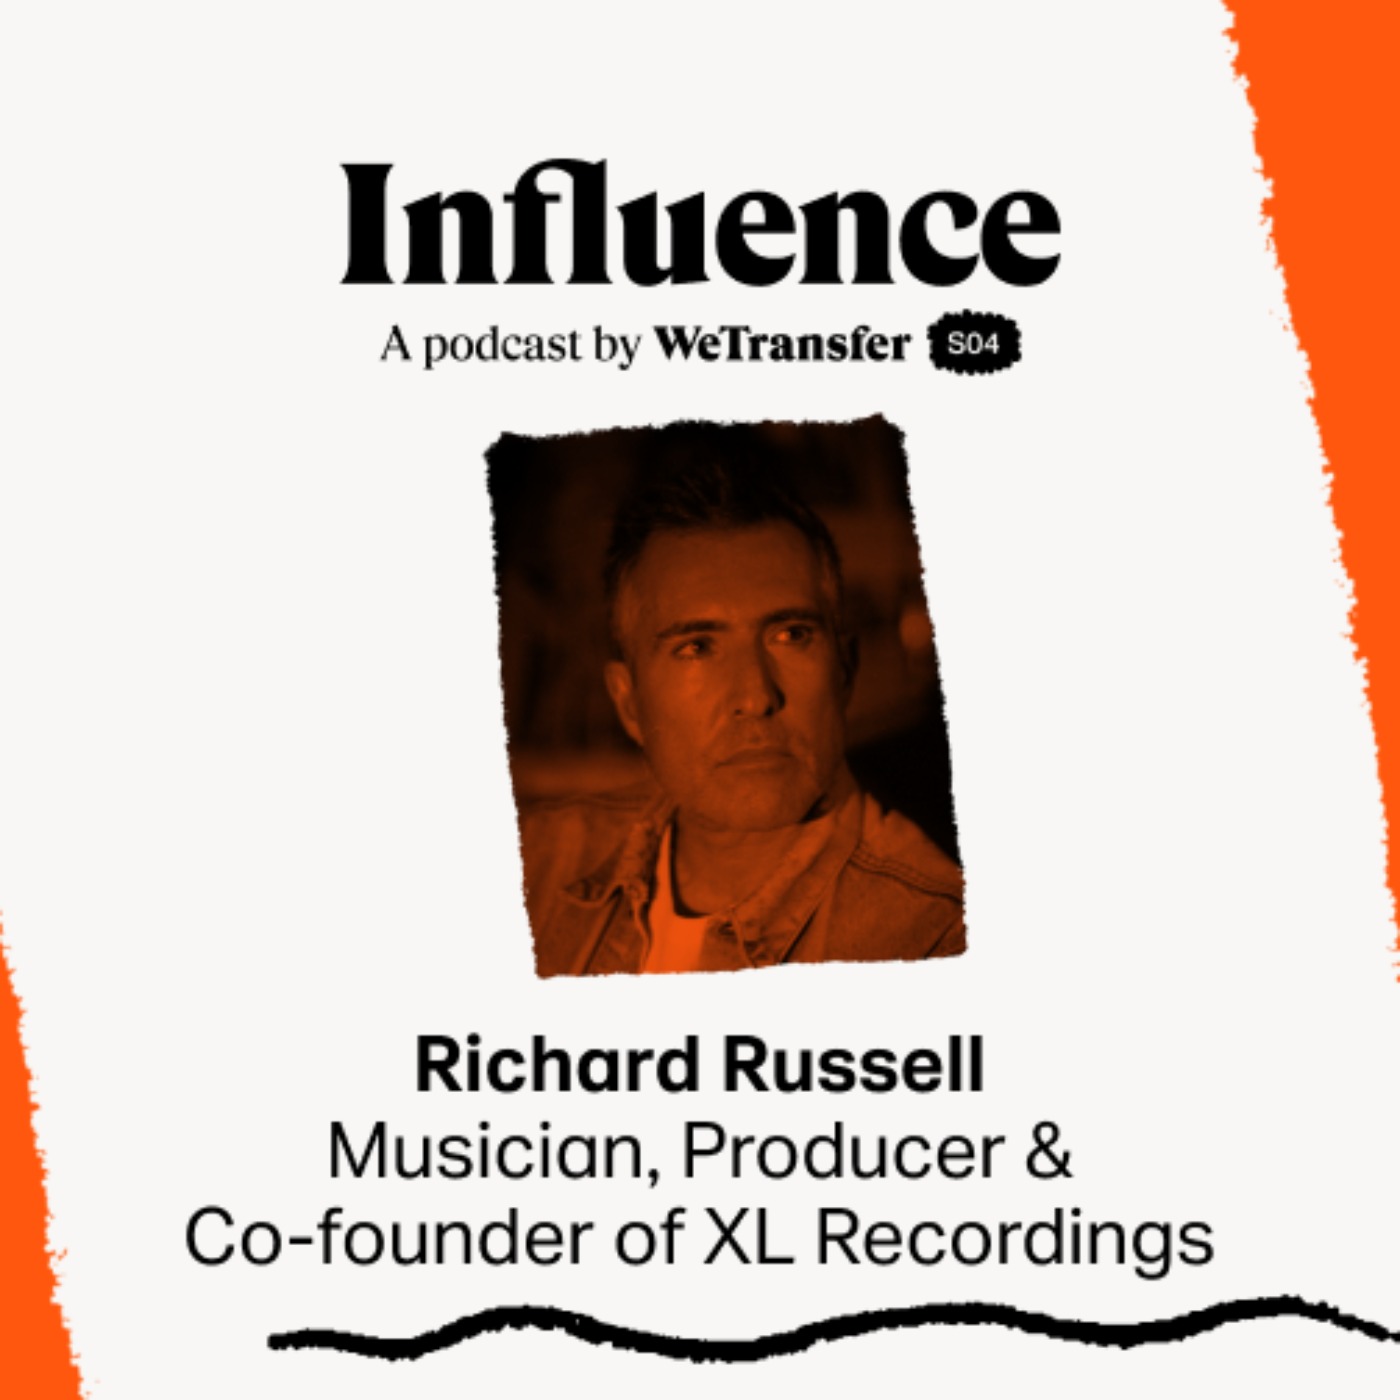 Richard Russell on the Power of Music